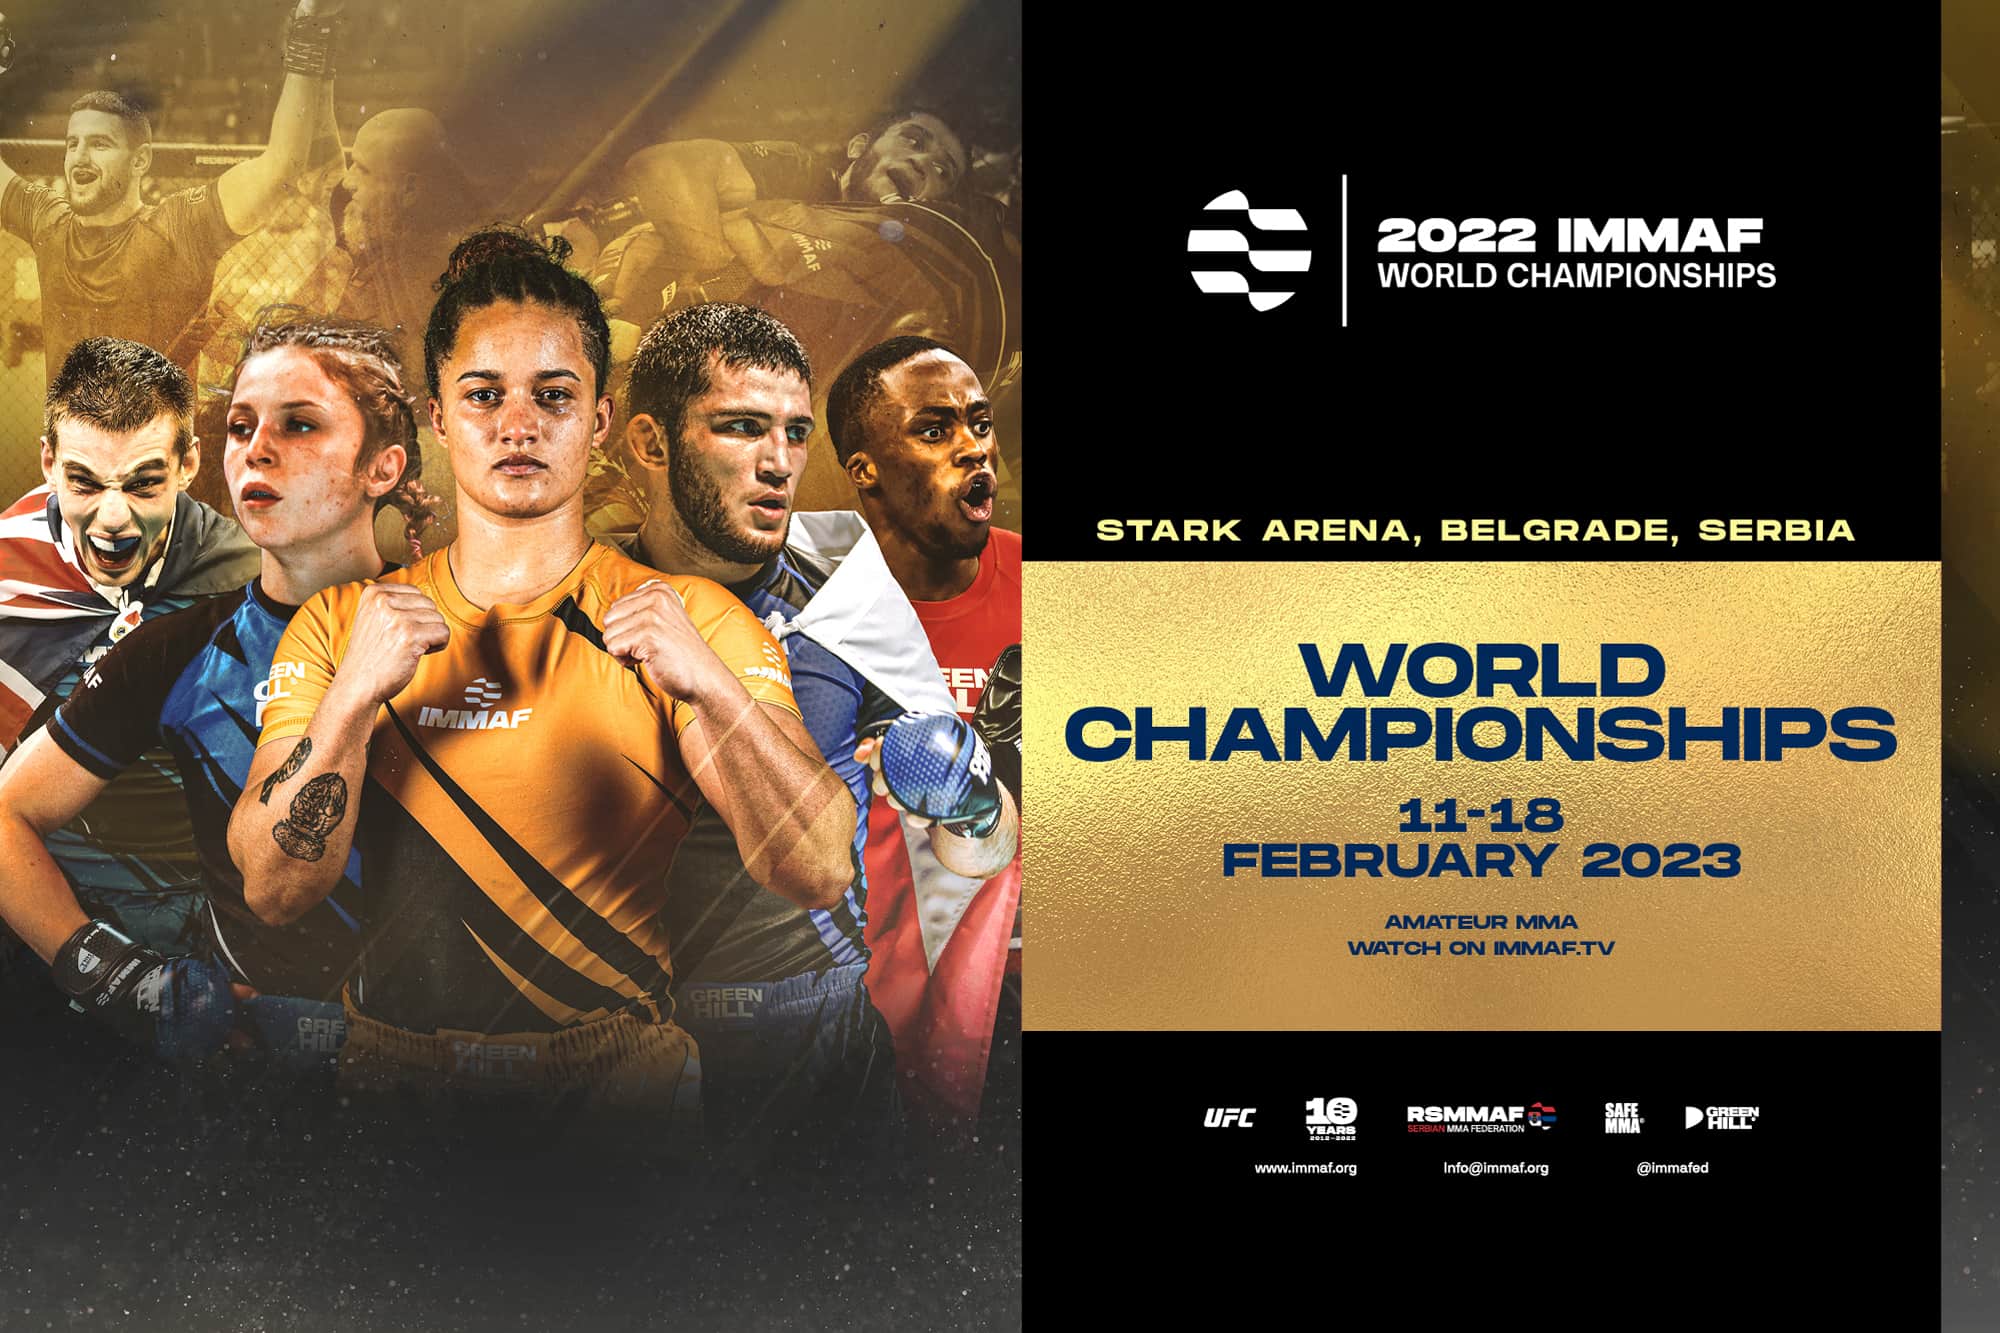 IMMAF Announces Athletes and Teams for 2022 World Championships